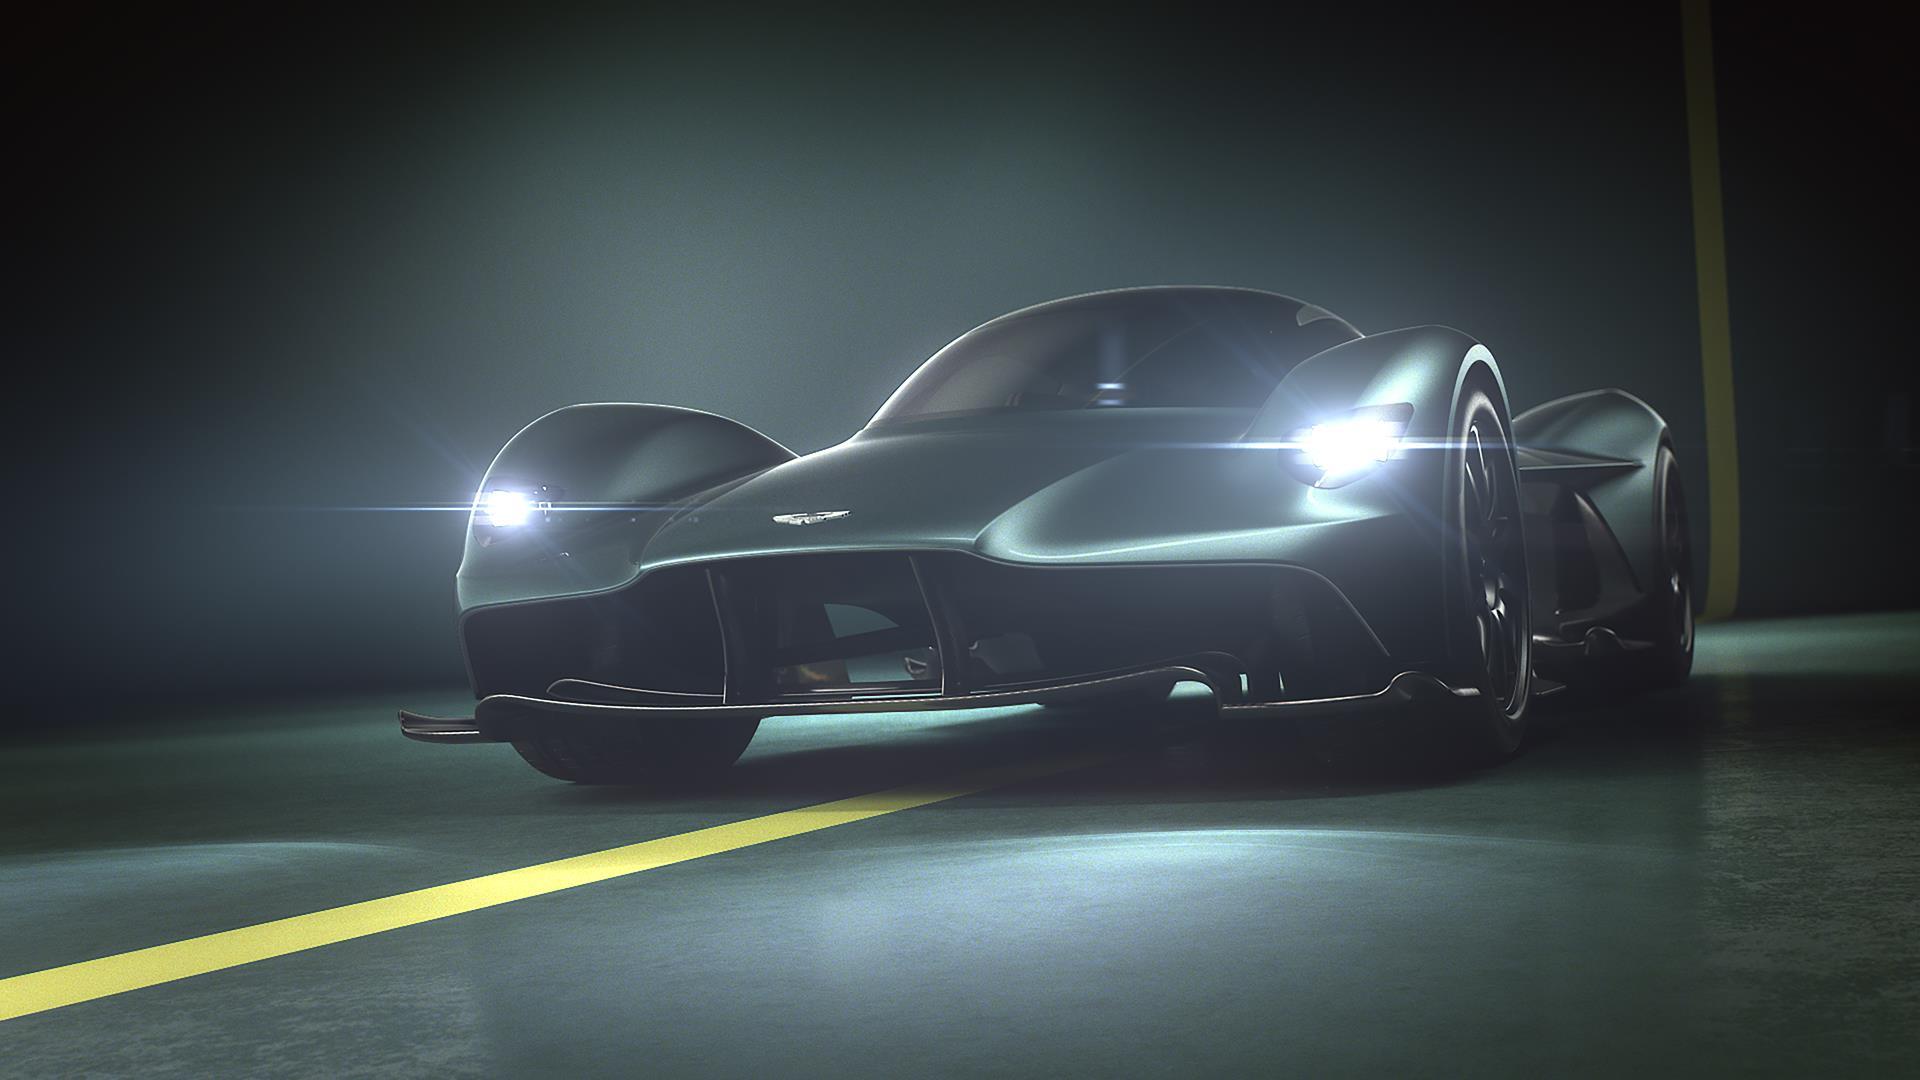 Aston Martin Valkyrie Wallpaper And Image Gallery